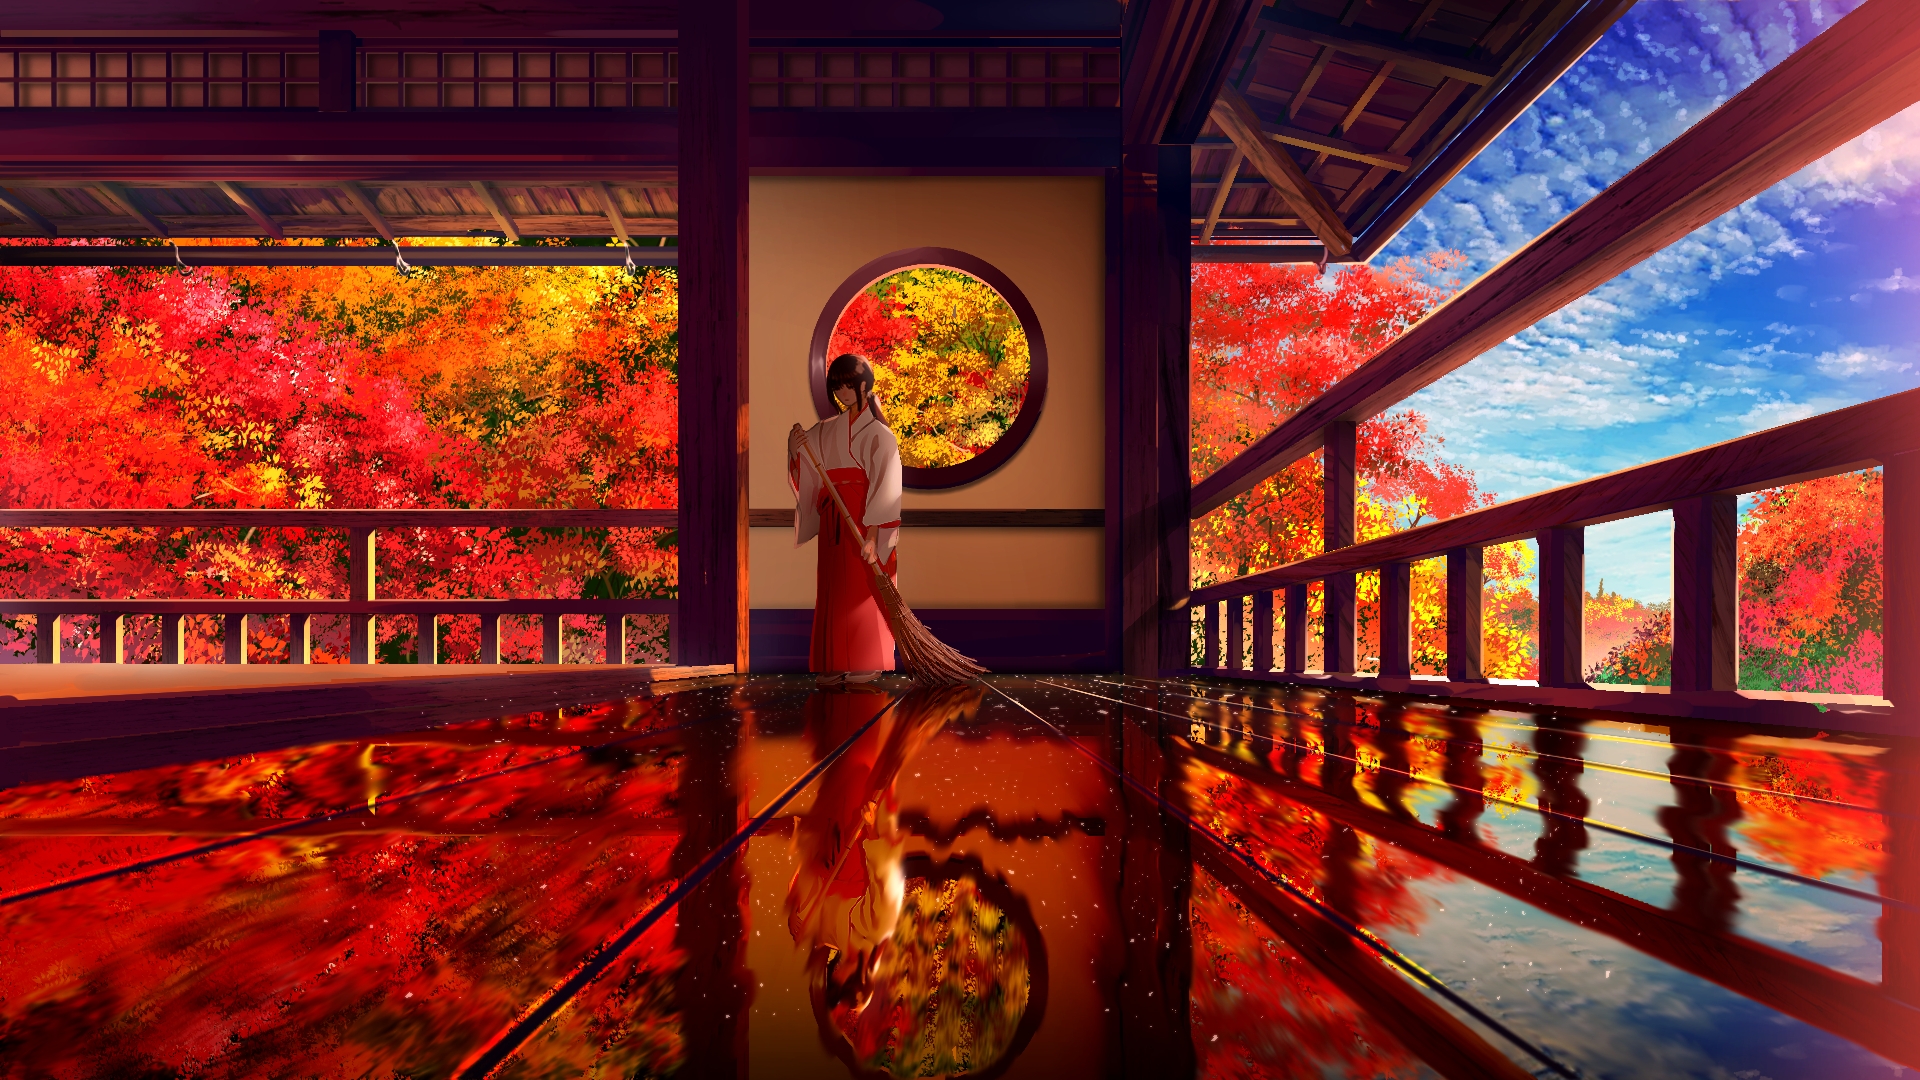 Download 1920x1080 Traditional Japanese Building, Miko, Anime Girl, Autumn, Fall Wallpaper for Widescreen